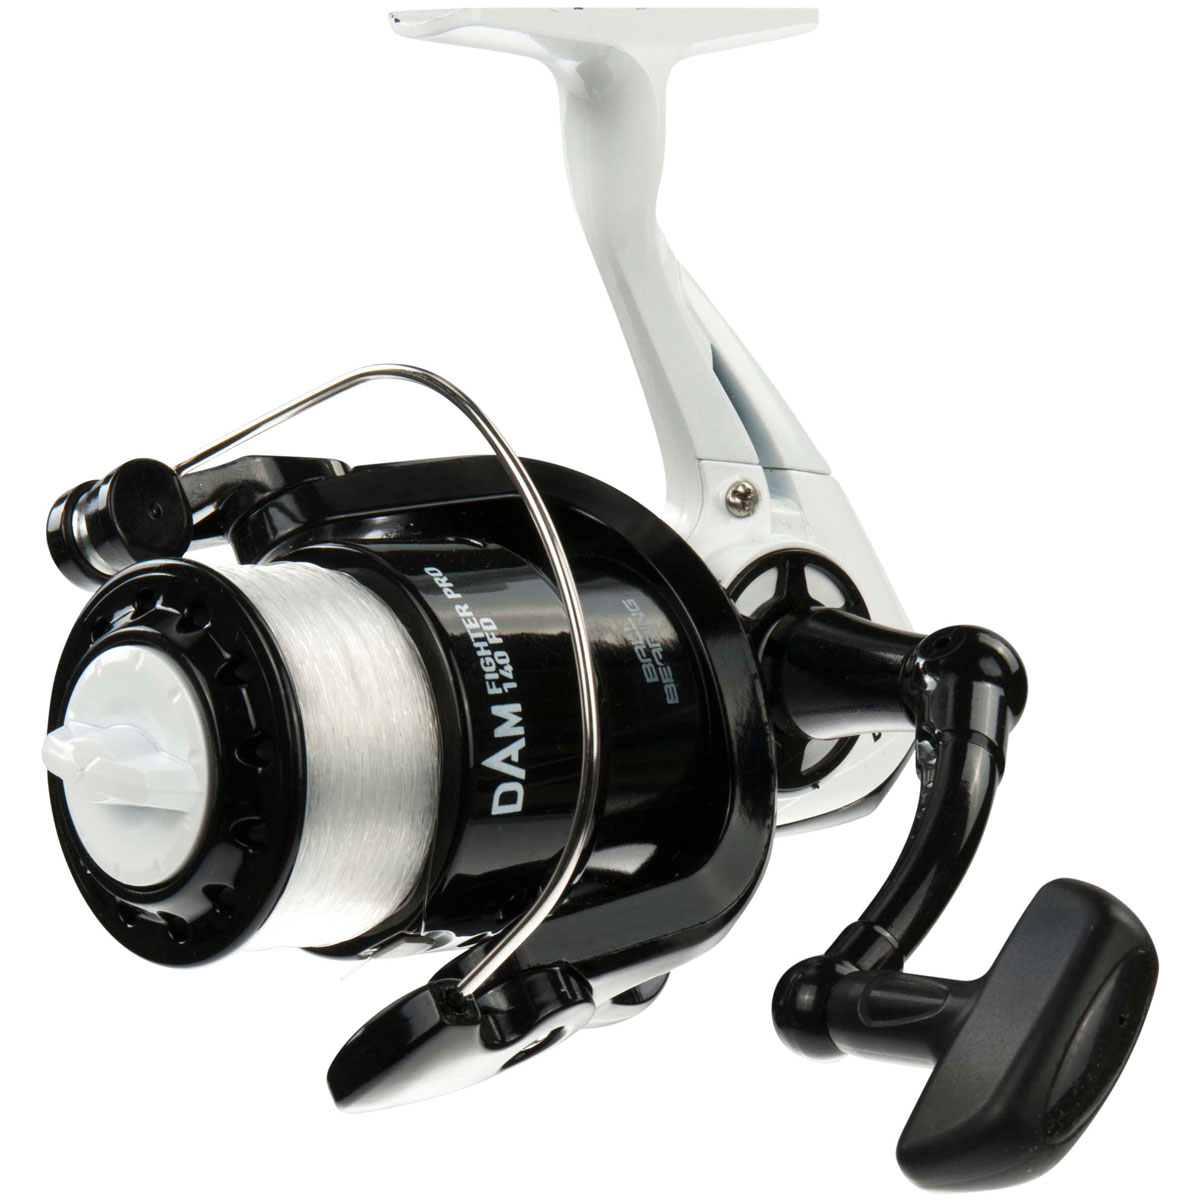 D.A.M Quick Fighter Pro Metal 320FD Fishing Reel Spare Spool RRP £29.99 